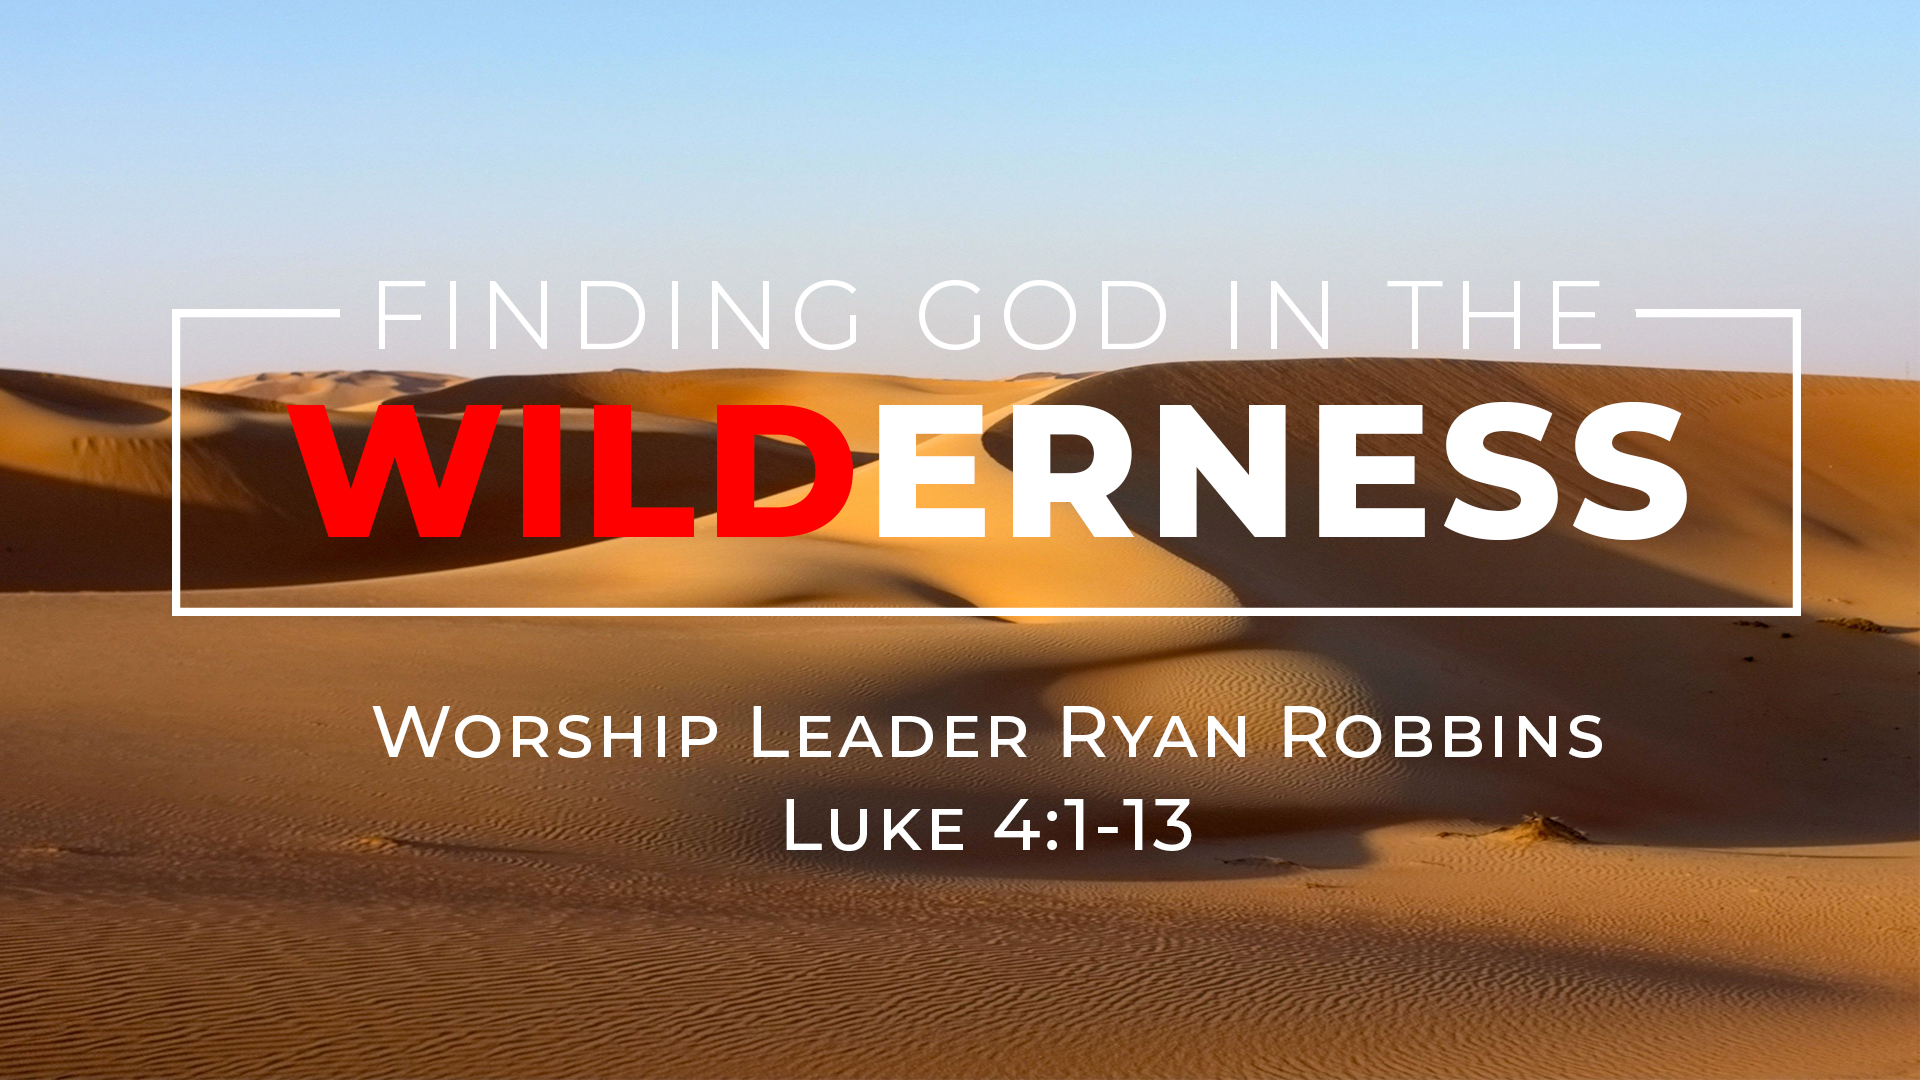 Finding God in the WILDerness